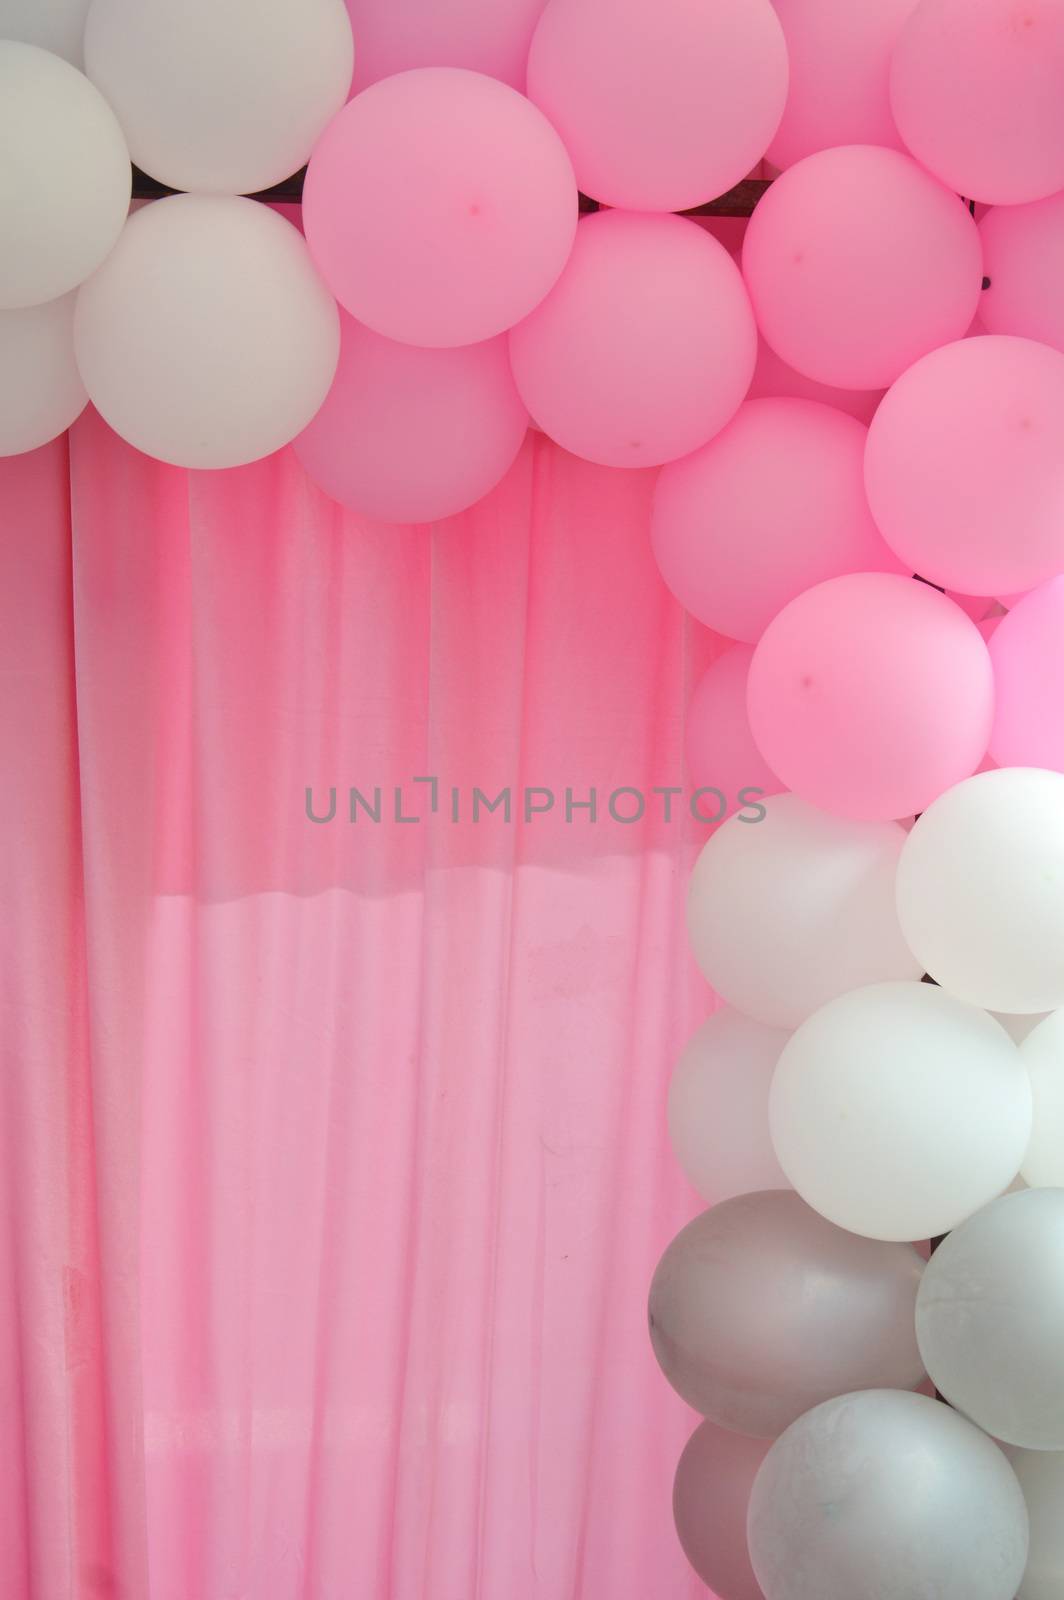 balloons frame on blank pink curtain  background